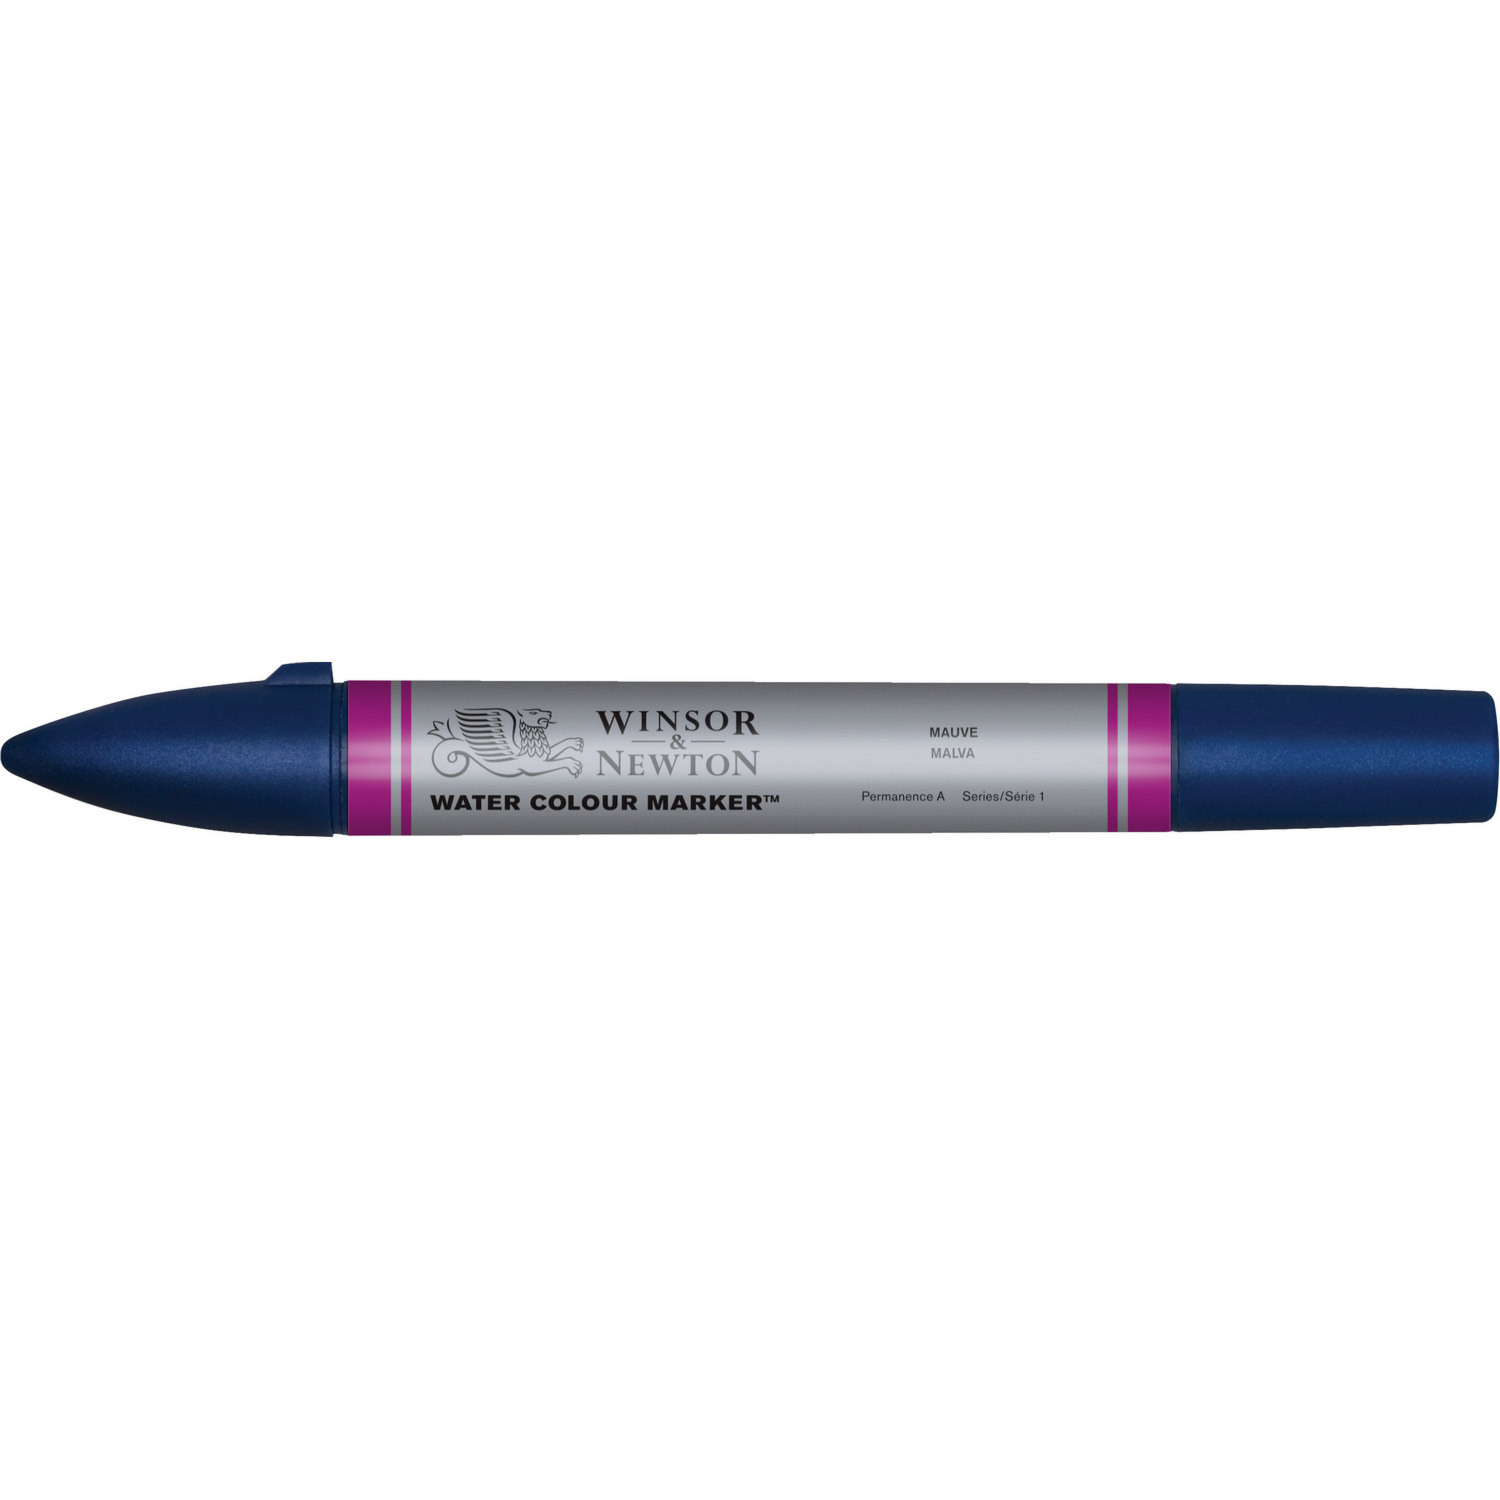 Winsor and Newton Water Colour Marker - Mauve Image 1